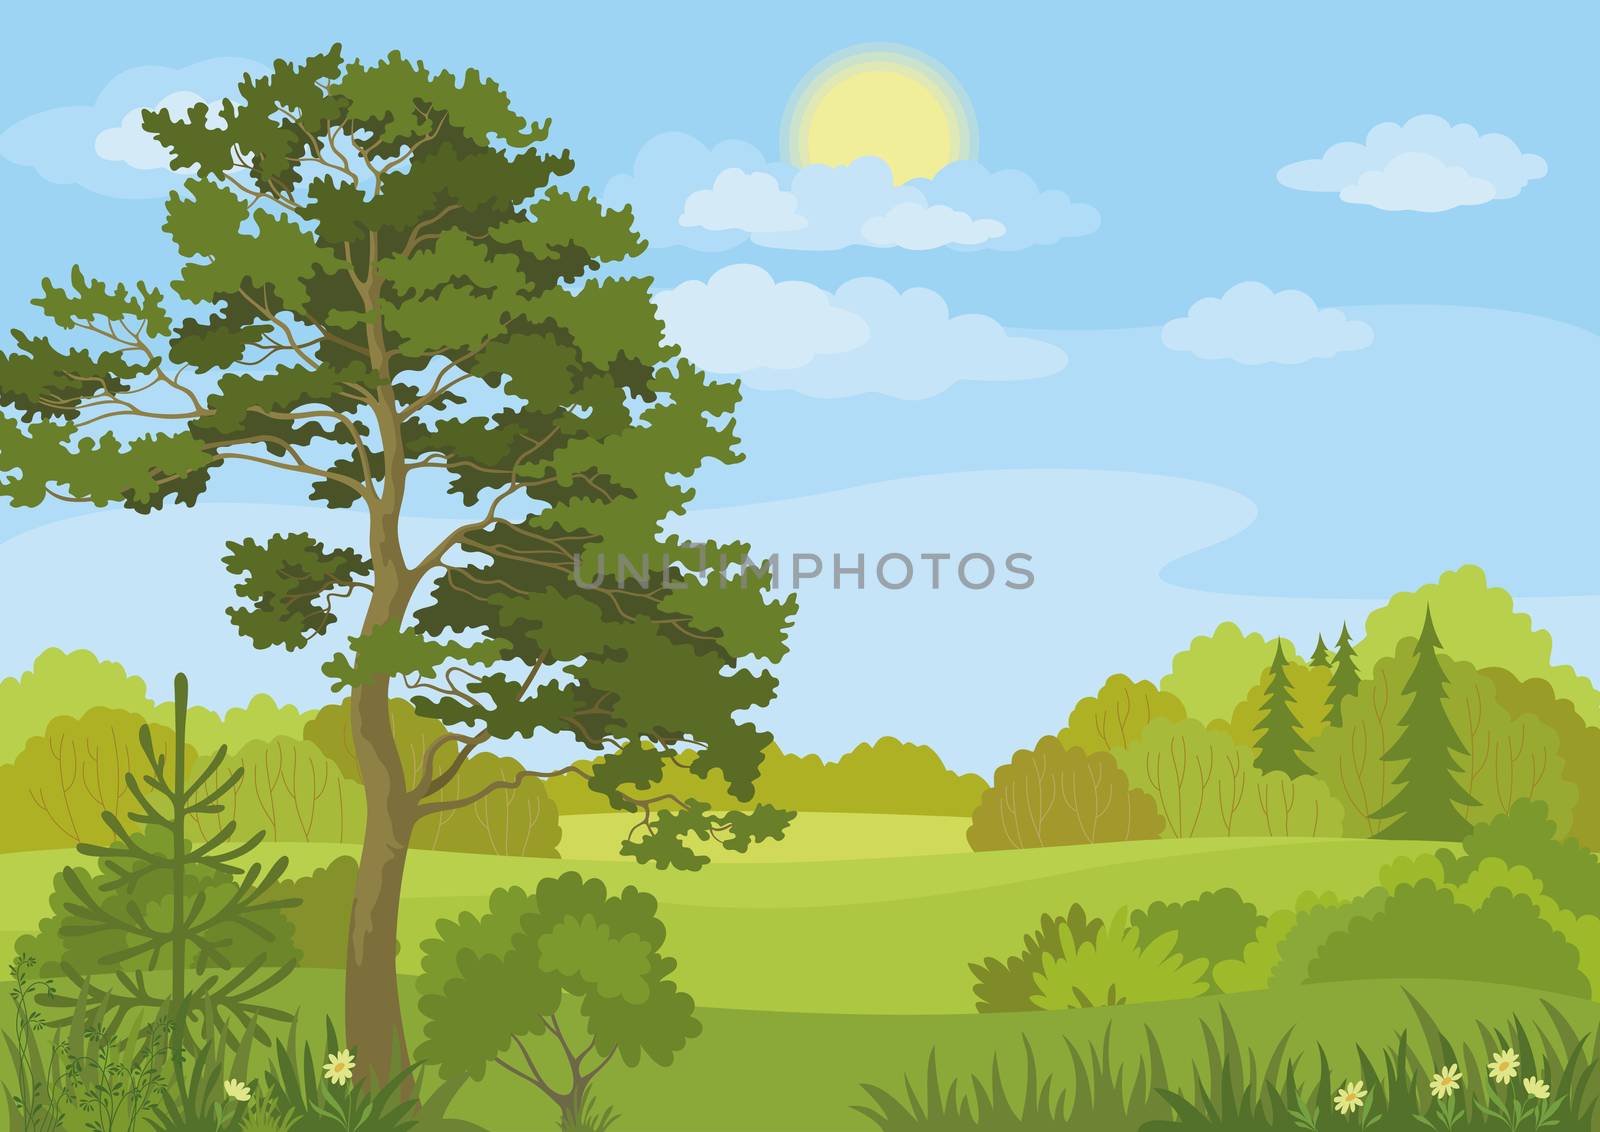 Summer landscape with pine and fir trees, bushes, flowers, grass, sun and blue sky.